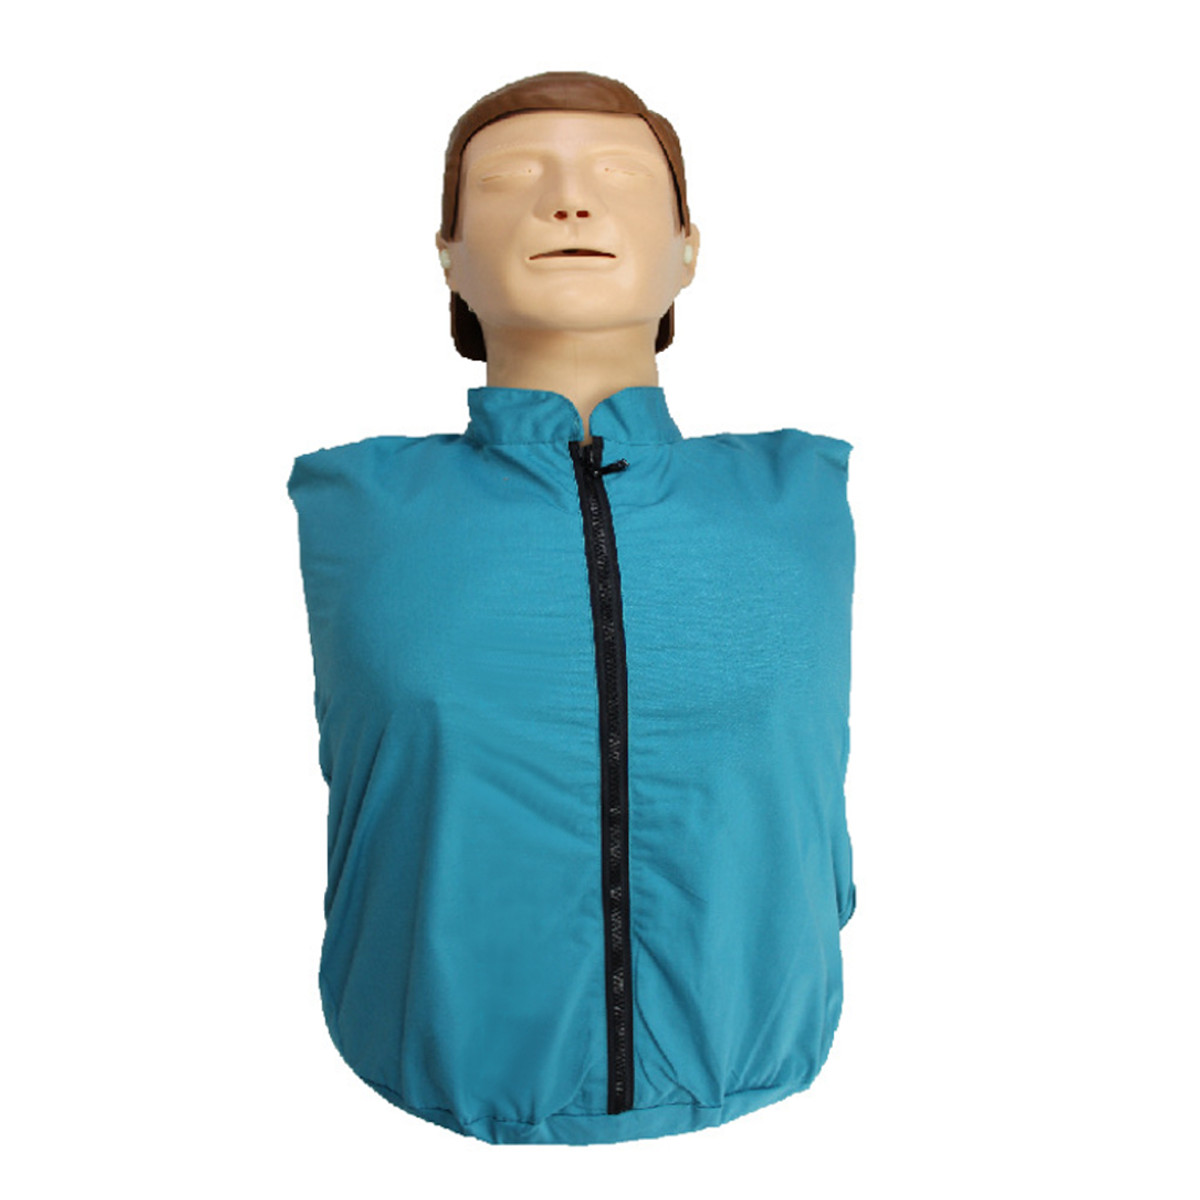 CPR-Adult-Manikin-AED-First-Aid-Training-Dummy-Training-Medical-Model-Respiration-Human-1545480-1